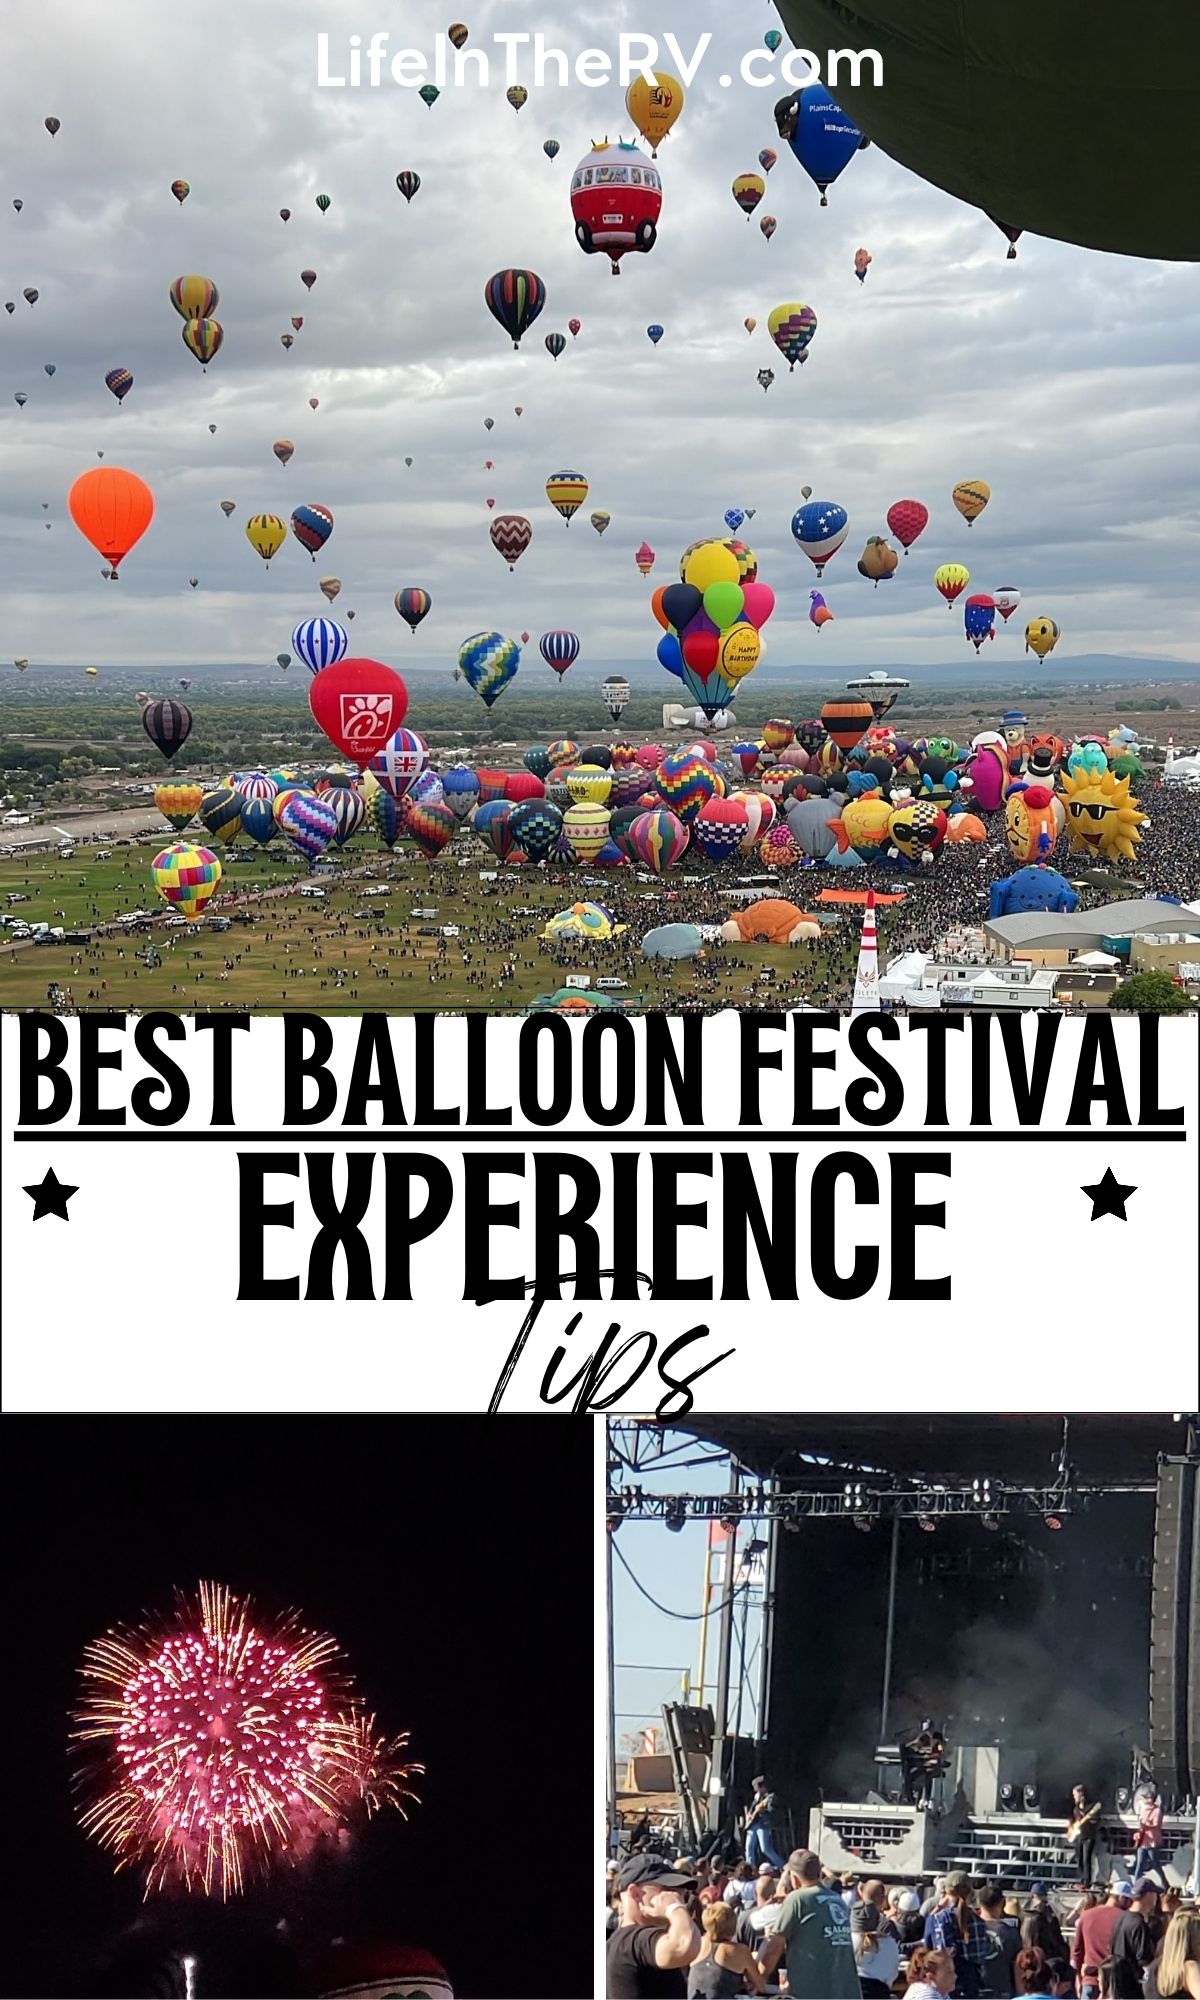 The best balloon festival experience.